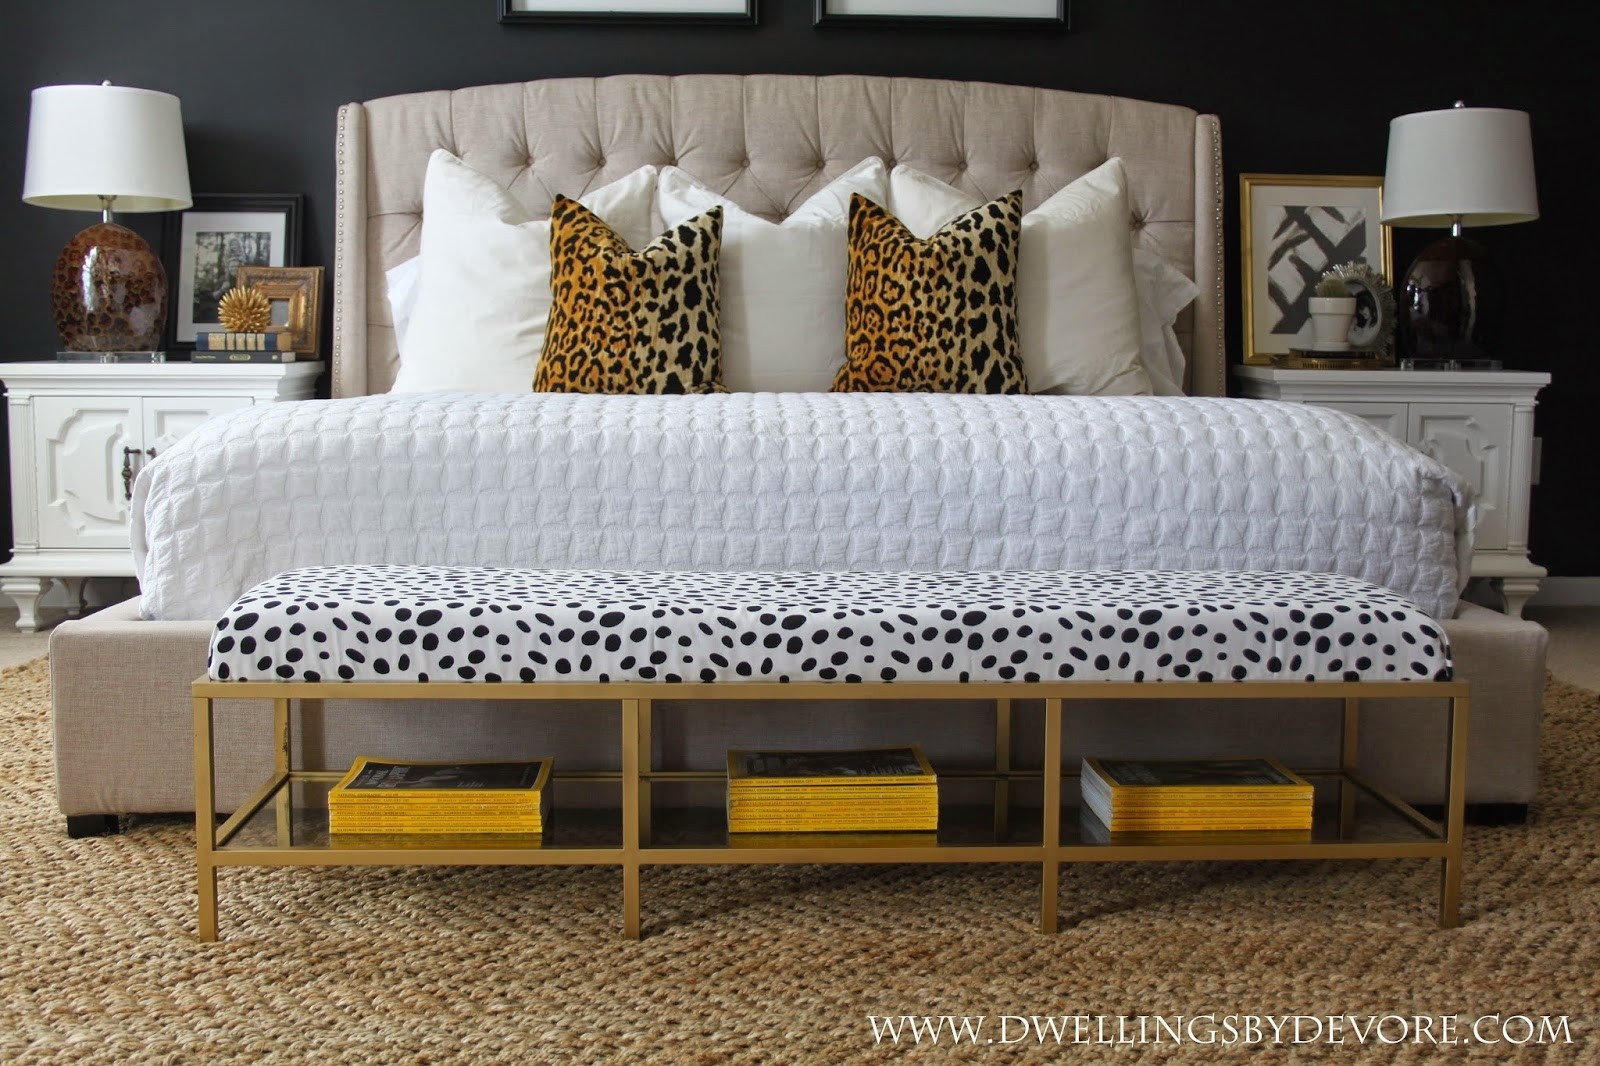 Storage Bench For Foot Of Bed Ideas On Foter